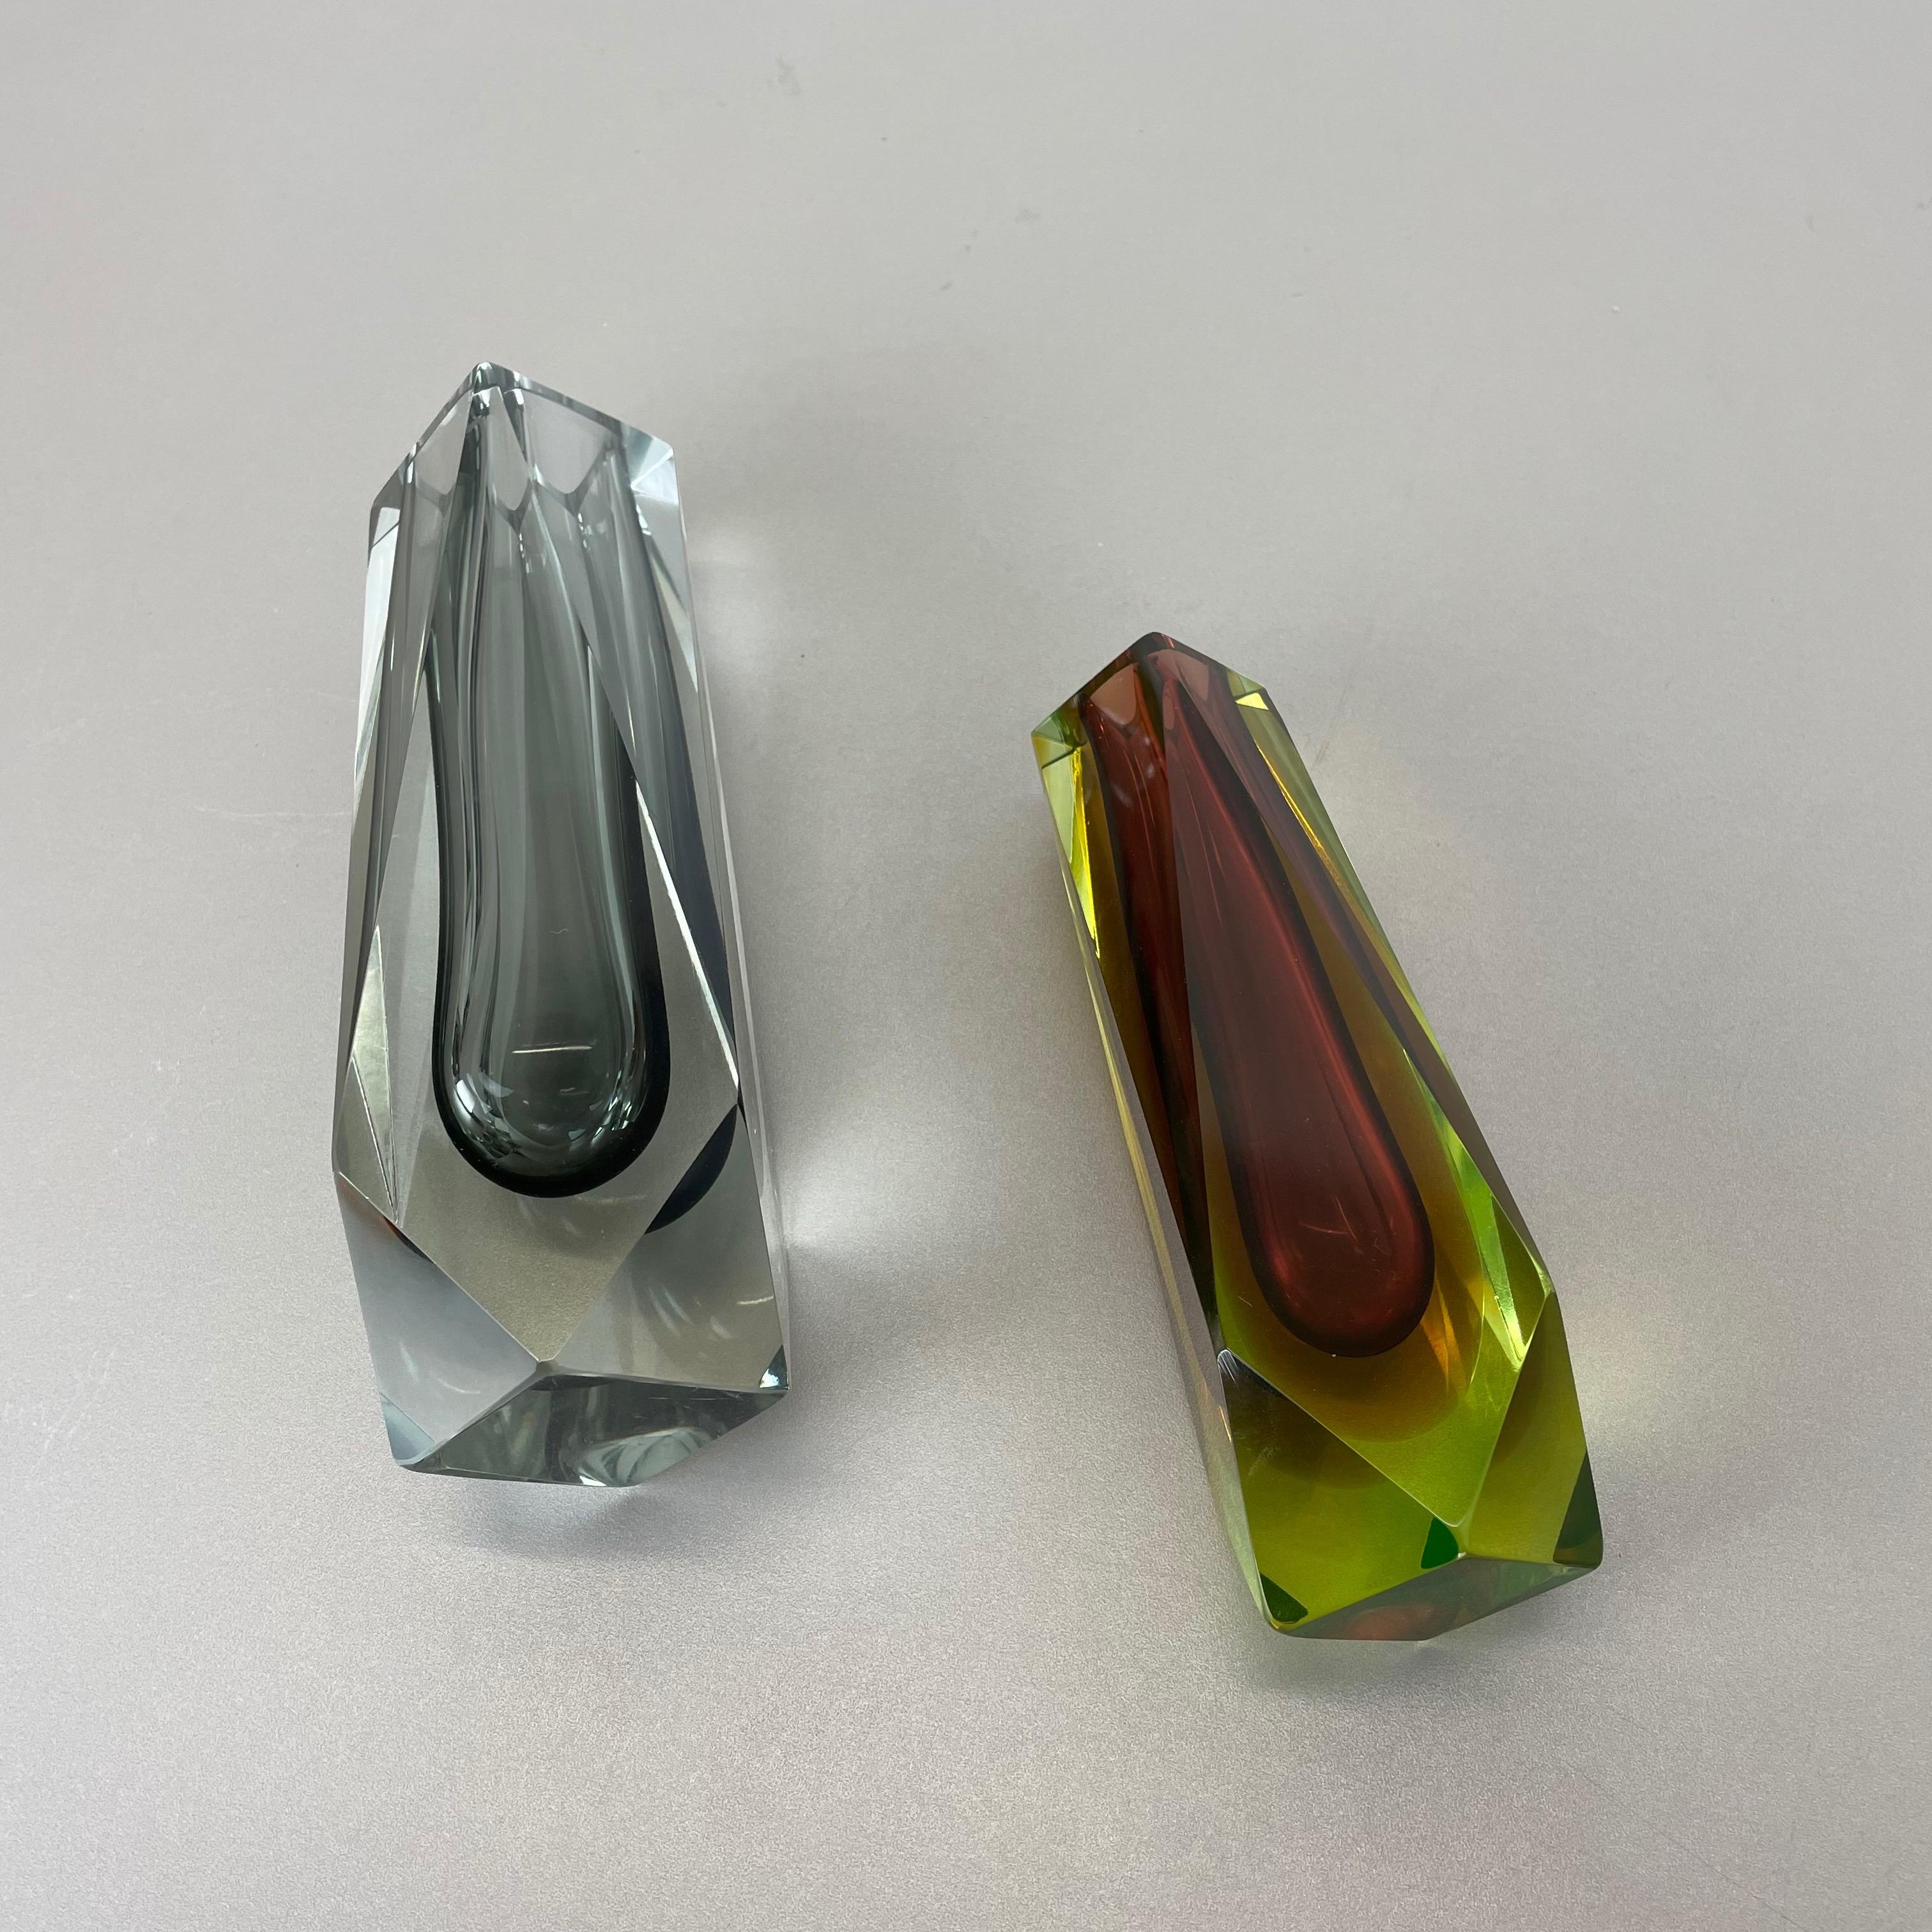 Rare Set of 2 Faceted Murano Glass Sommerso Vases, Italy, 1970s For Sale 14